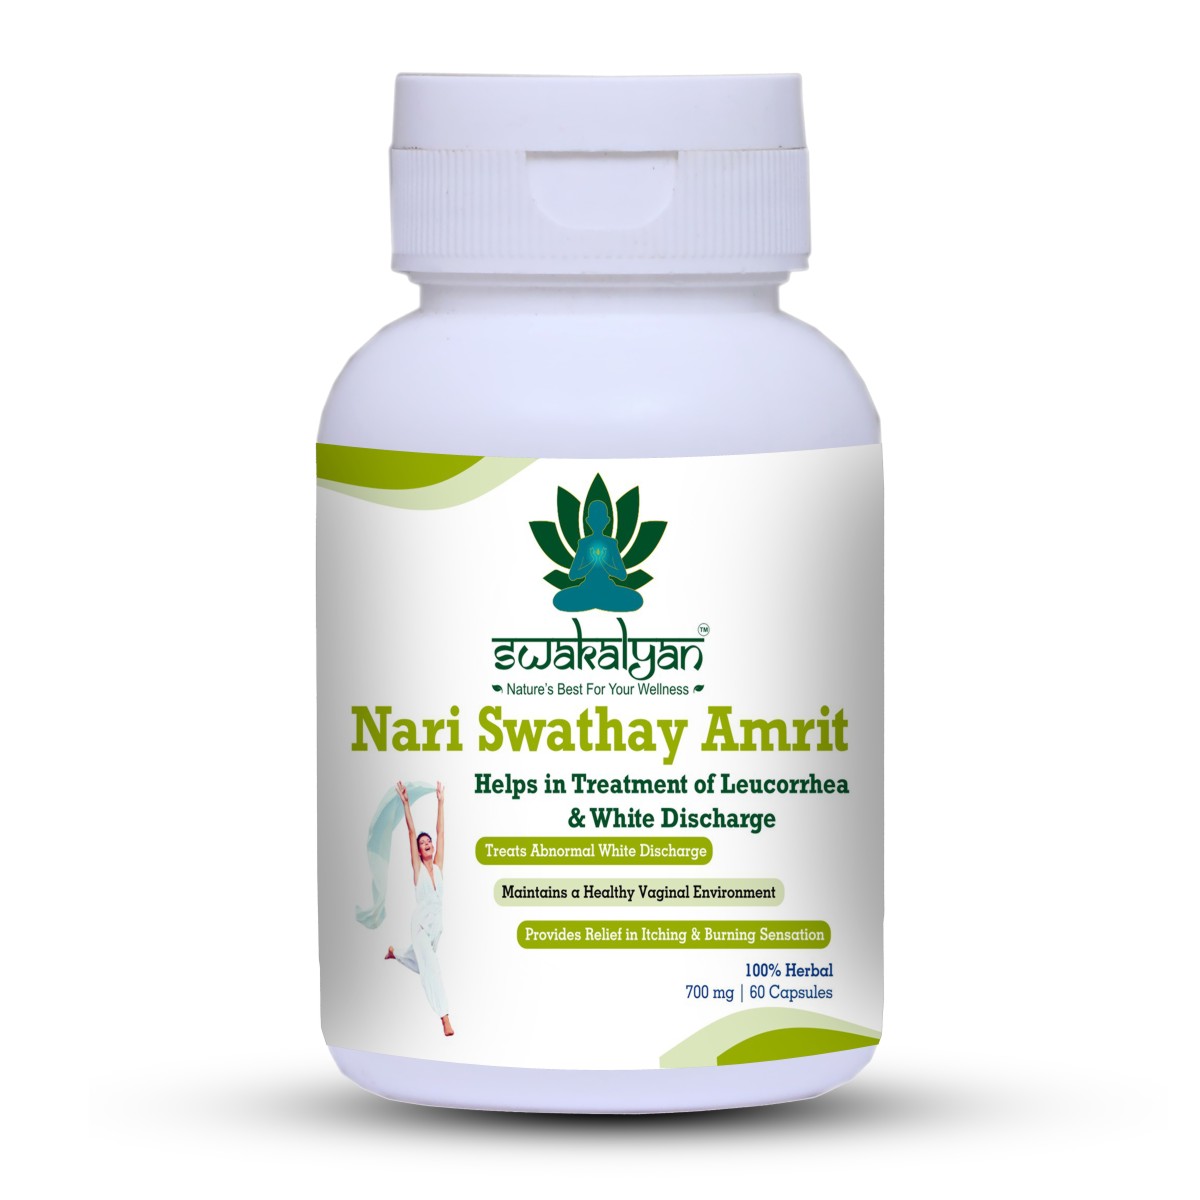  Swakalyan Nari Swasthay Amrit -Helps in the treatment of leucorrhoea & White Discharge